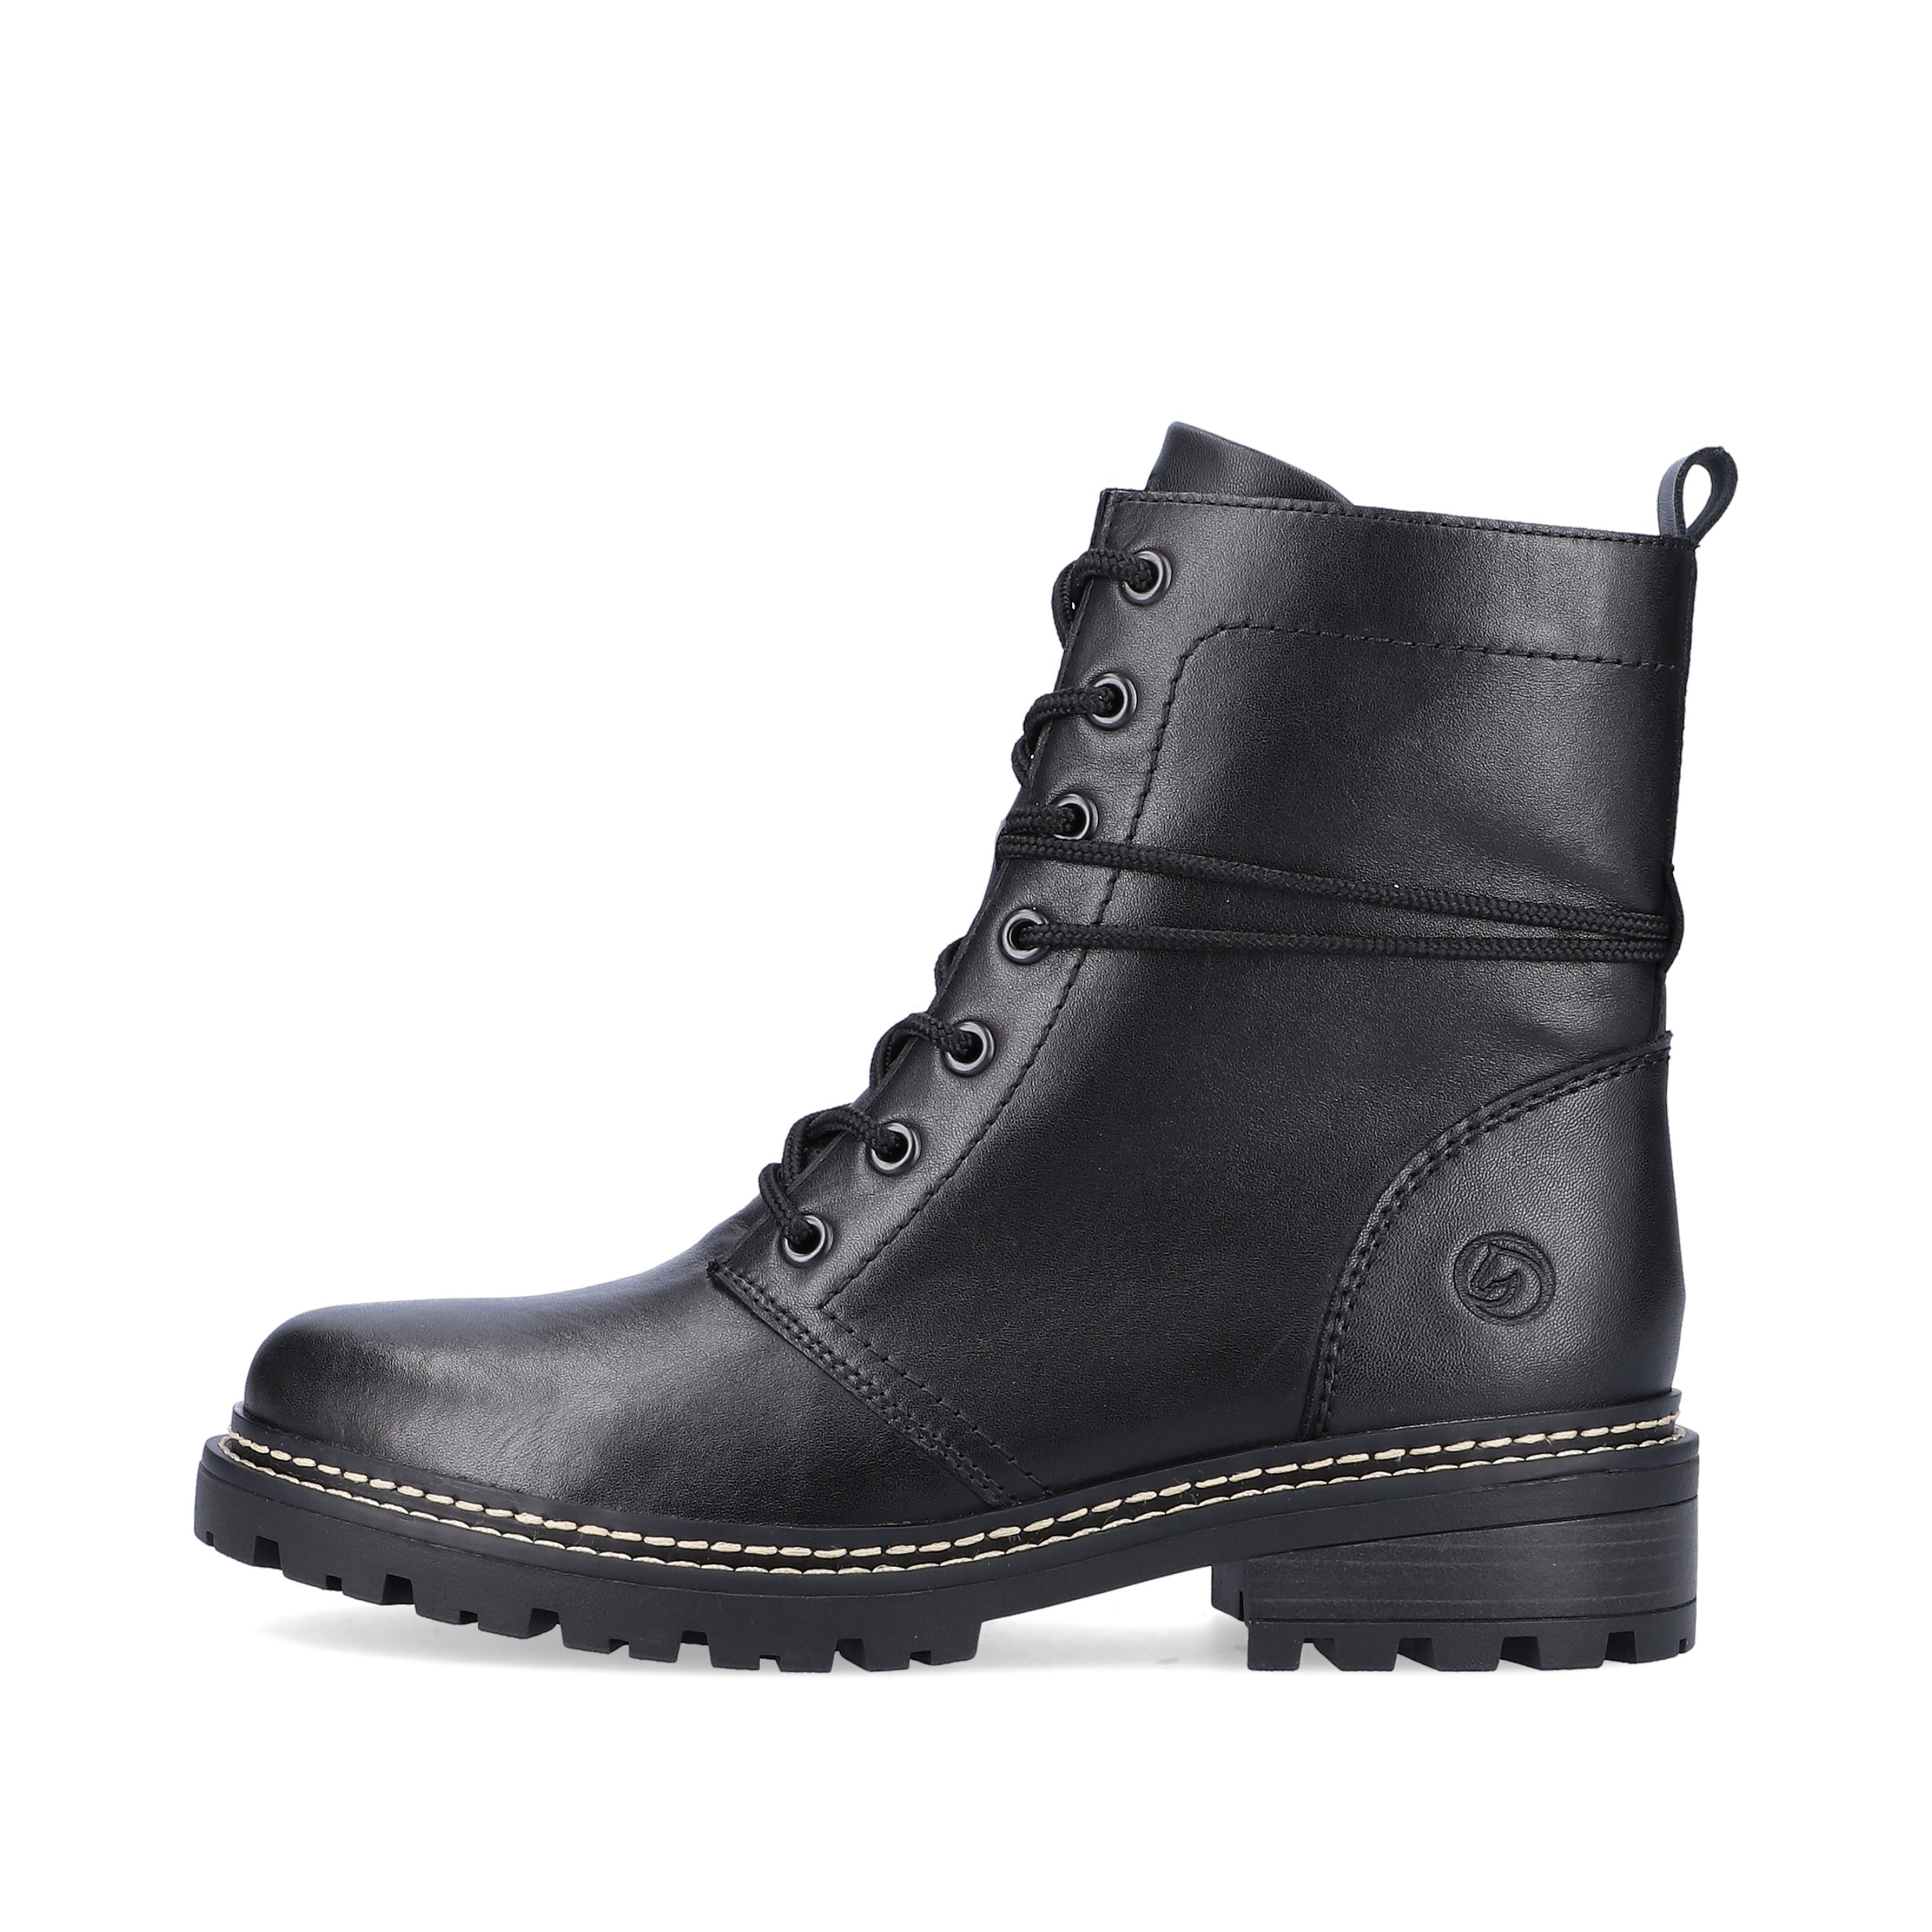 Night black remonte women´s biker boots D0B75-01 with cushioning profile sole. The outside of the shoe